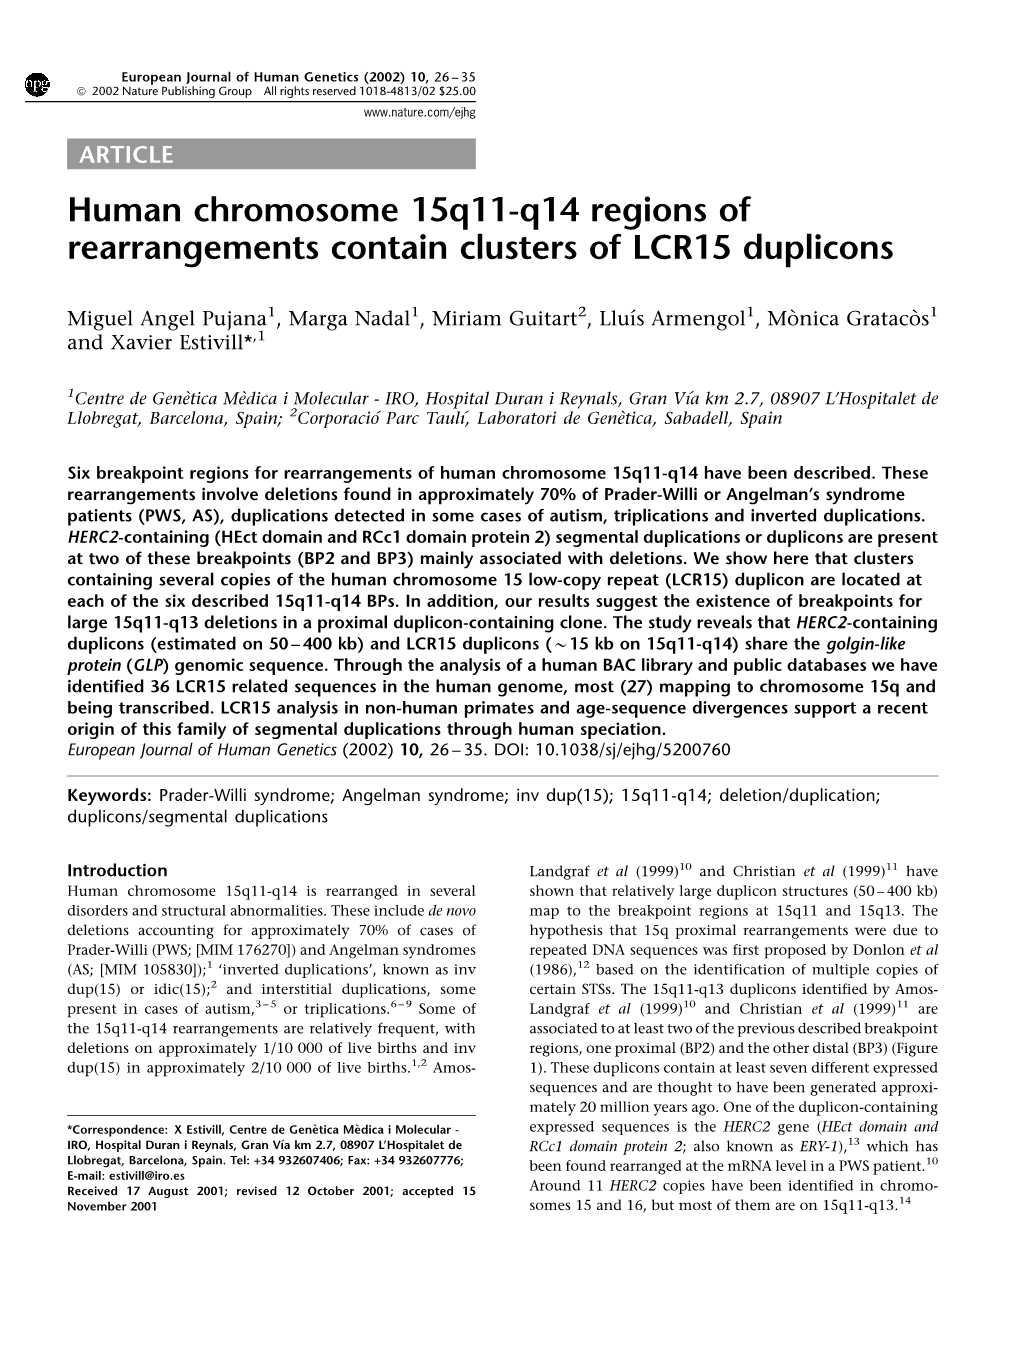 Human Chromosome 15Q11-Q14 Regions of Rearrangements Contain Clusters of LCR15 Duplicons